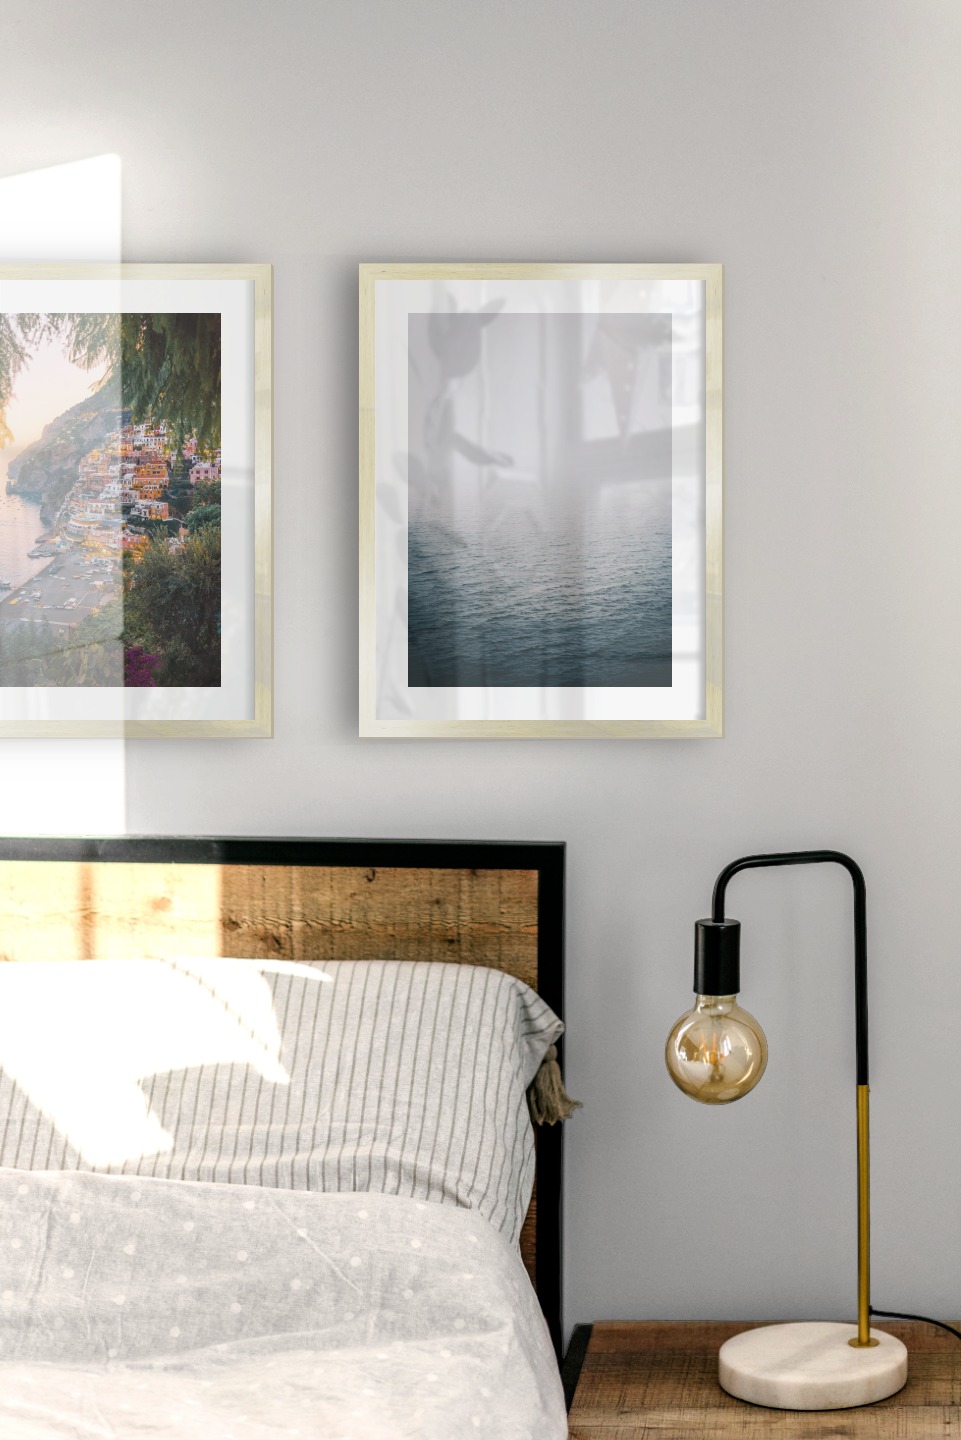 Gallery wall with picture frames in gold in sizes 30x40 with prints "City by the sea" and "Fog over the sea"